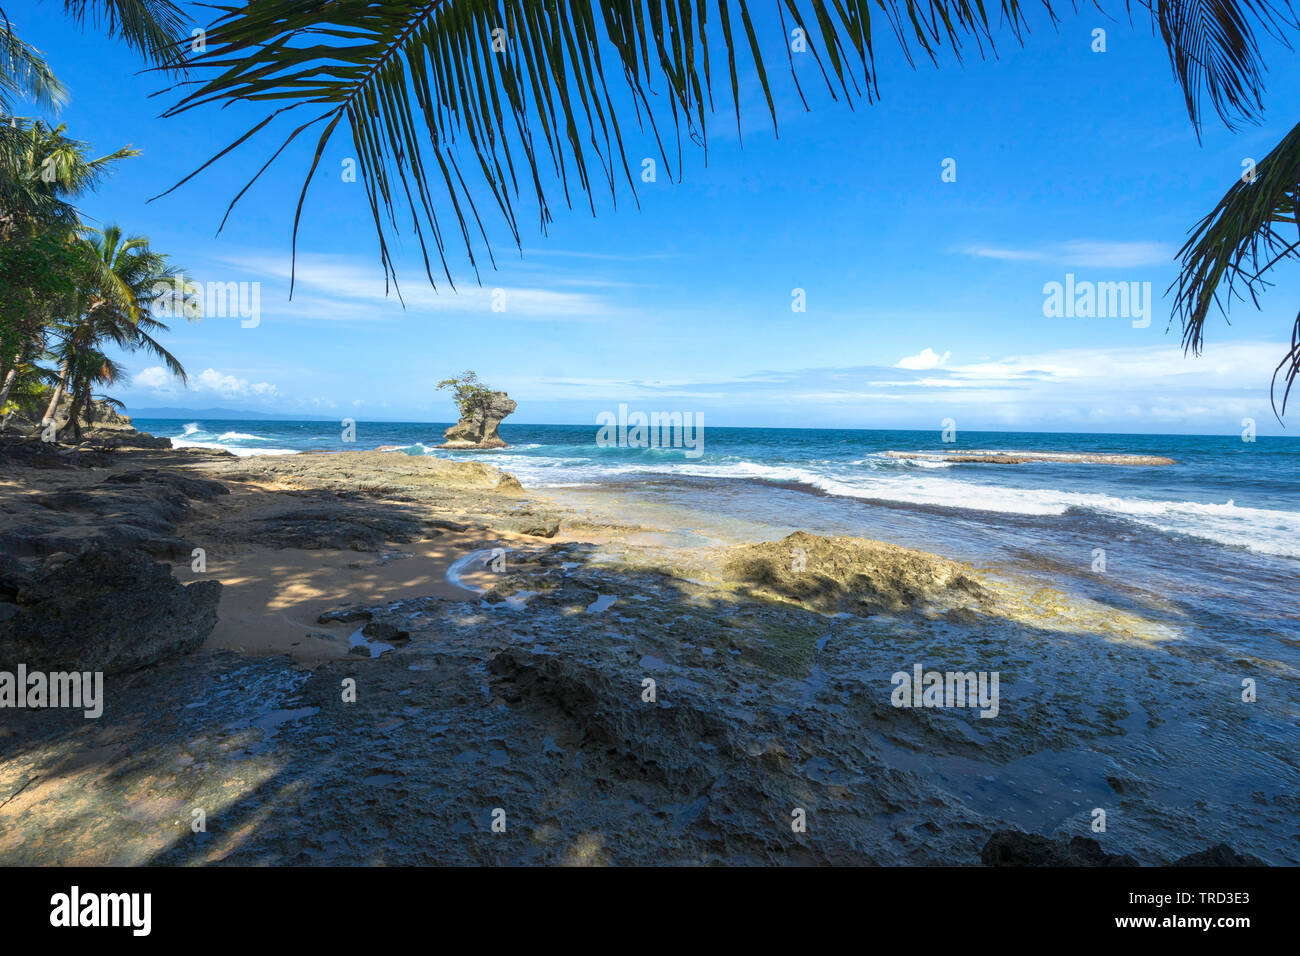 BEAUTIFUL BLUE MORNING ON THE CRYSTAL CLEAR CARIBBEAN OCEAN AND BEACH WITH PALMS, WAVES AND CLOUDS Stock Photo